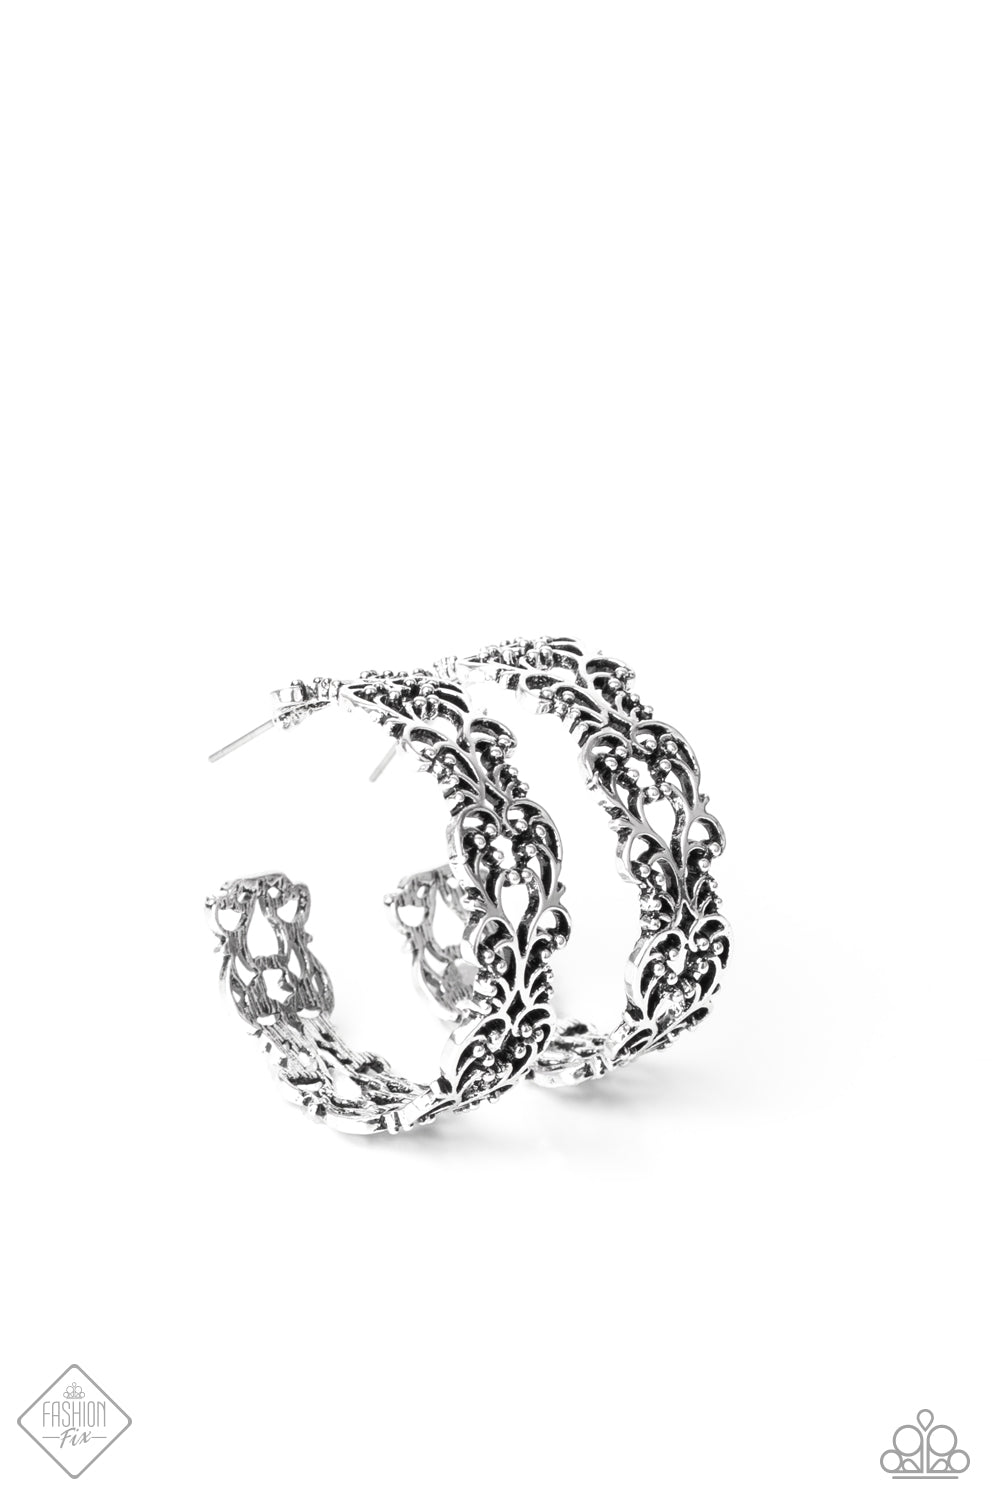 Laurel Wreaths - Silver Hoop Earrings - Paparazzi Accessories - Brushed in an antiqued shimmer, studded vine-like filigree climbs into a whimsical silver hoop for a seasonal flair. Earring attaches to a standard post fitting. Hoop measures approximately 1 1/2" in diameter. Sold as one pair of hoop earrings.